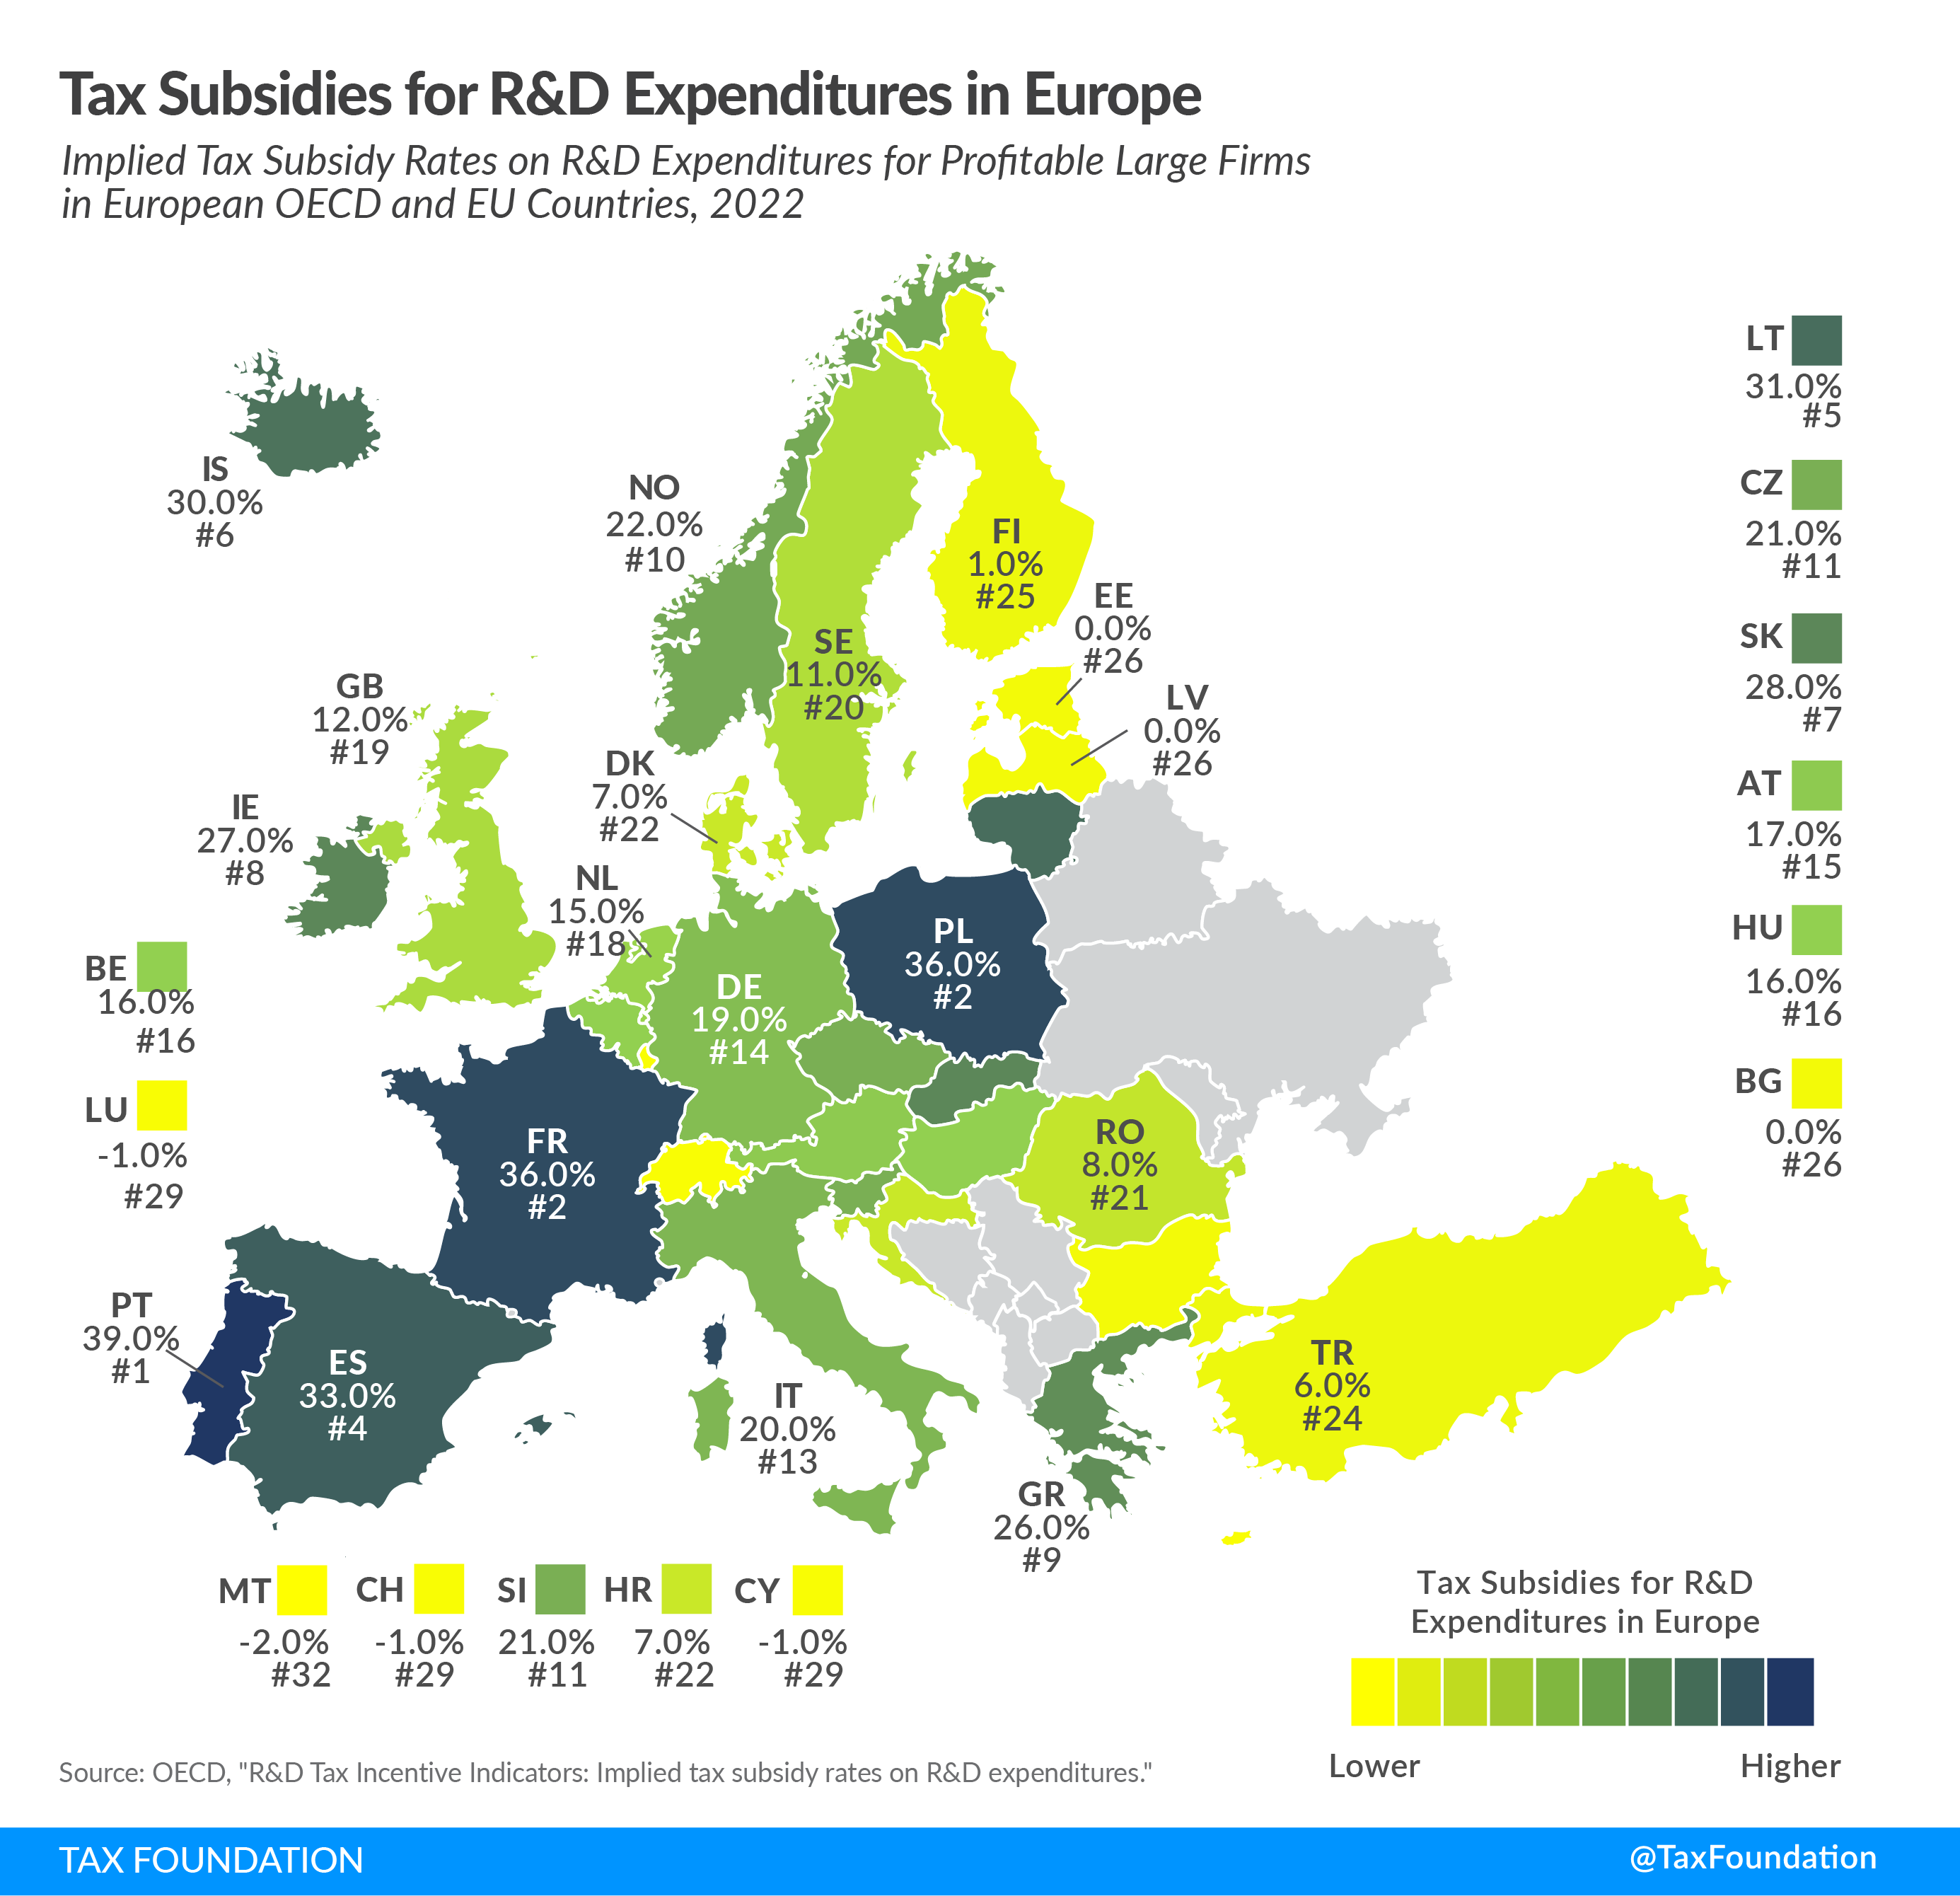 Tax Subsidies for R&D Expenditures in Europe including R&D tax incentives